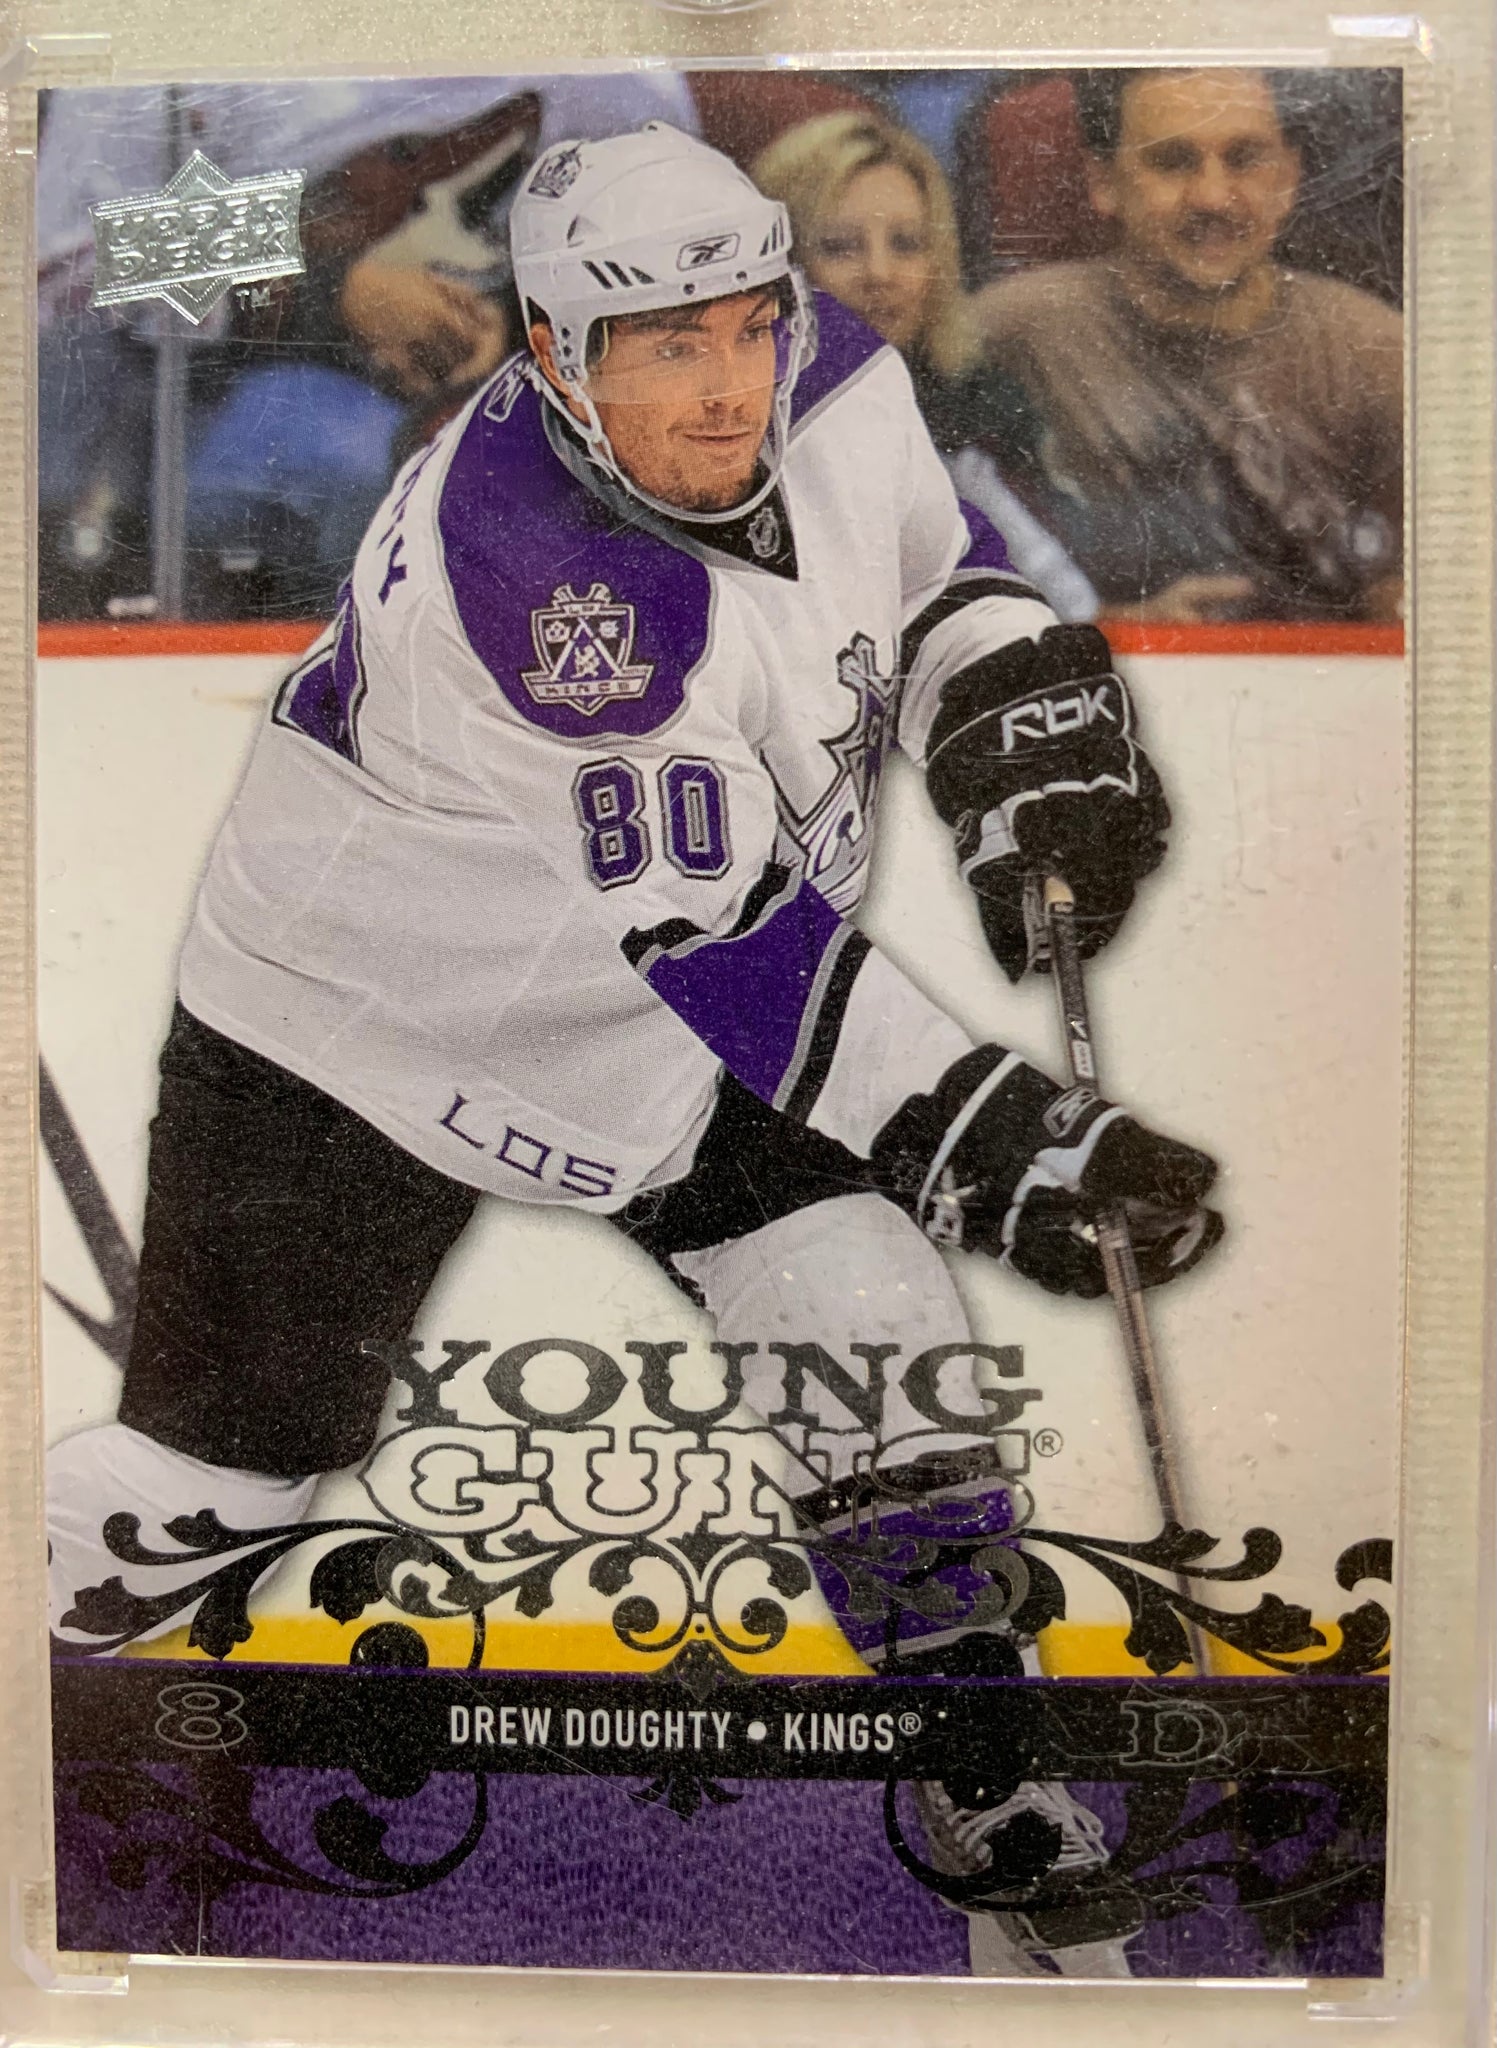 2008-09 UPPER DECK HOCKEY #220 LOS ANGELES KINGS - DREW DOUGHTY YOUNG GUNS ROOKIE CARD RAW